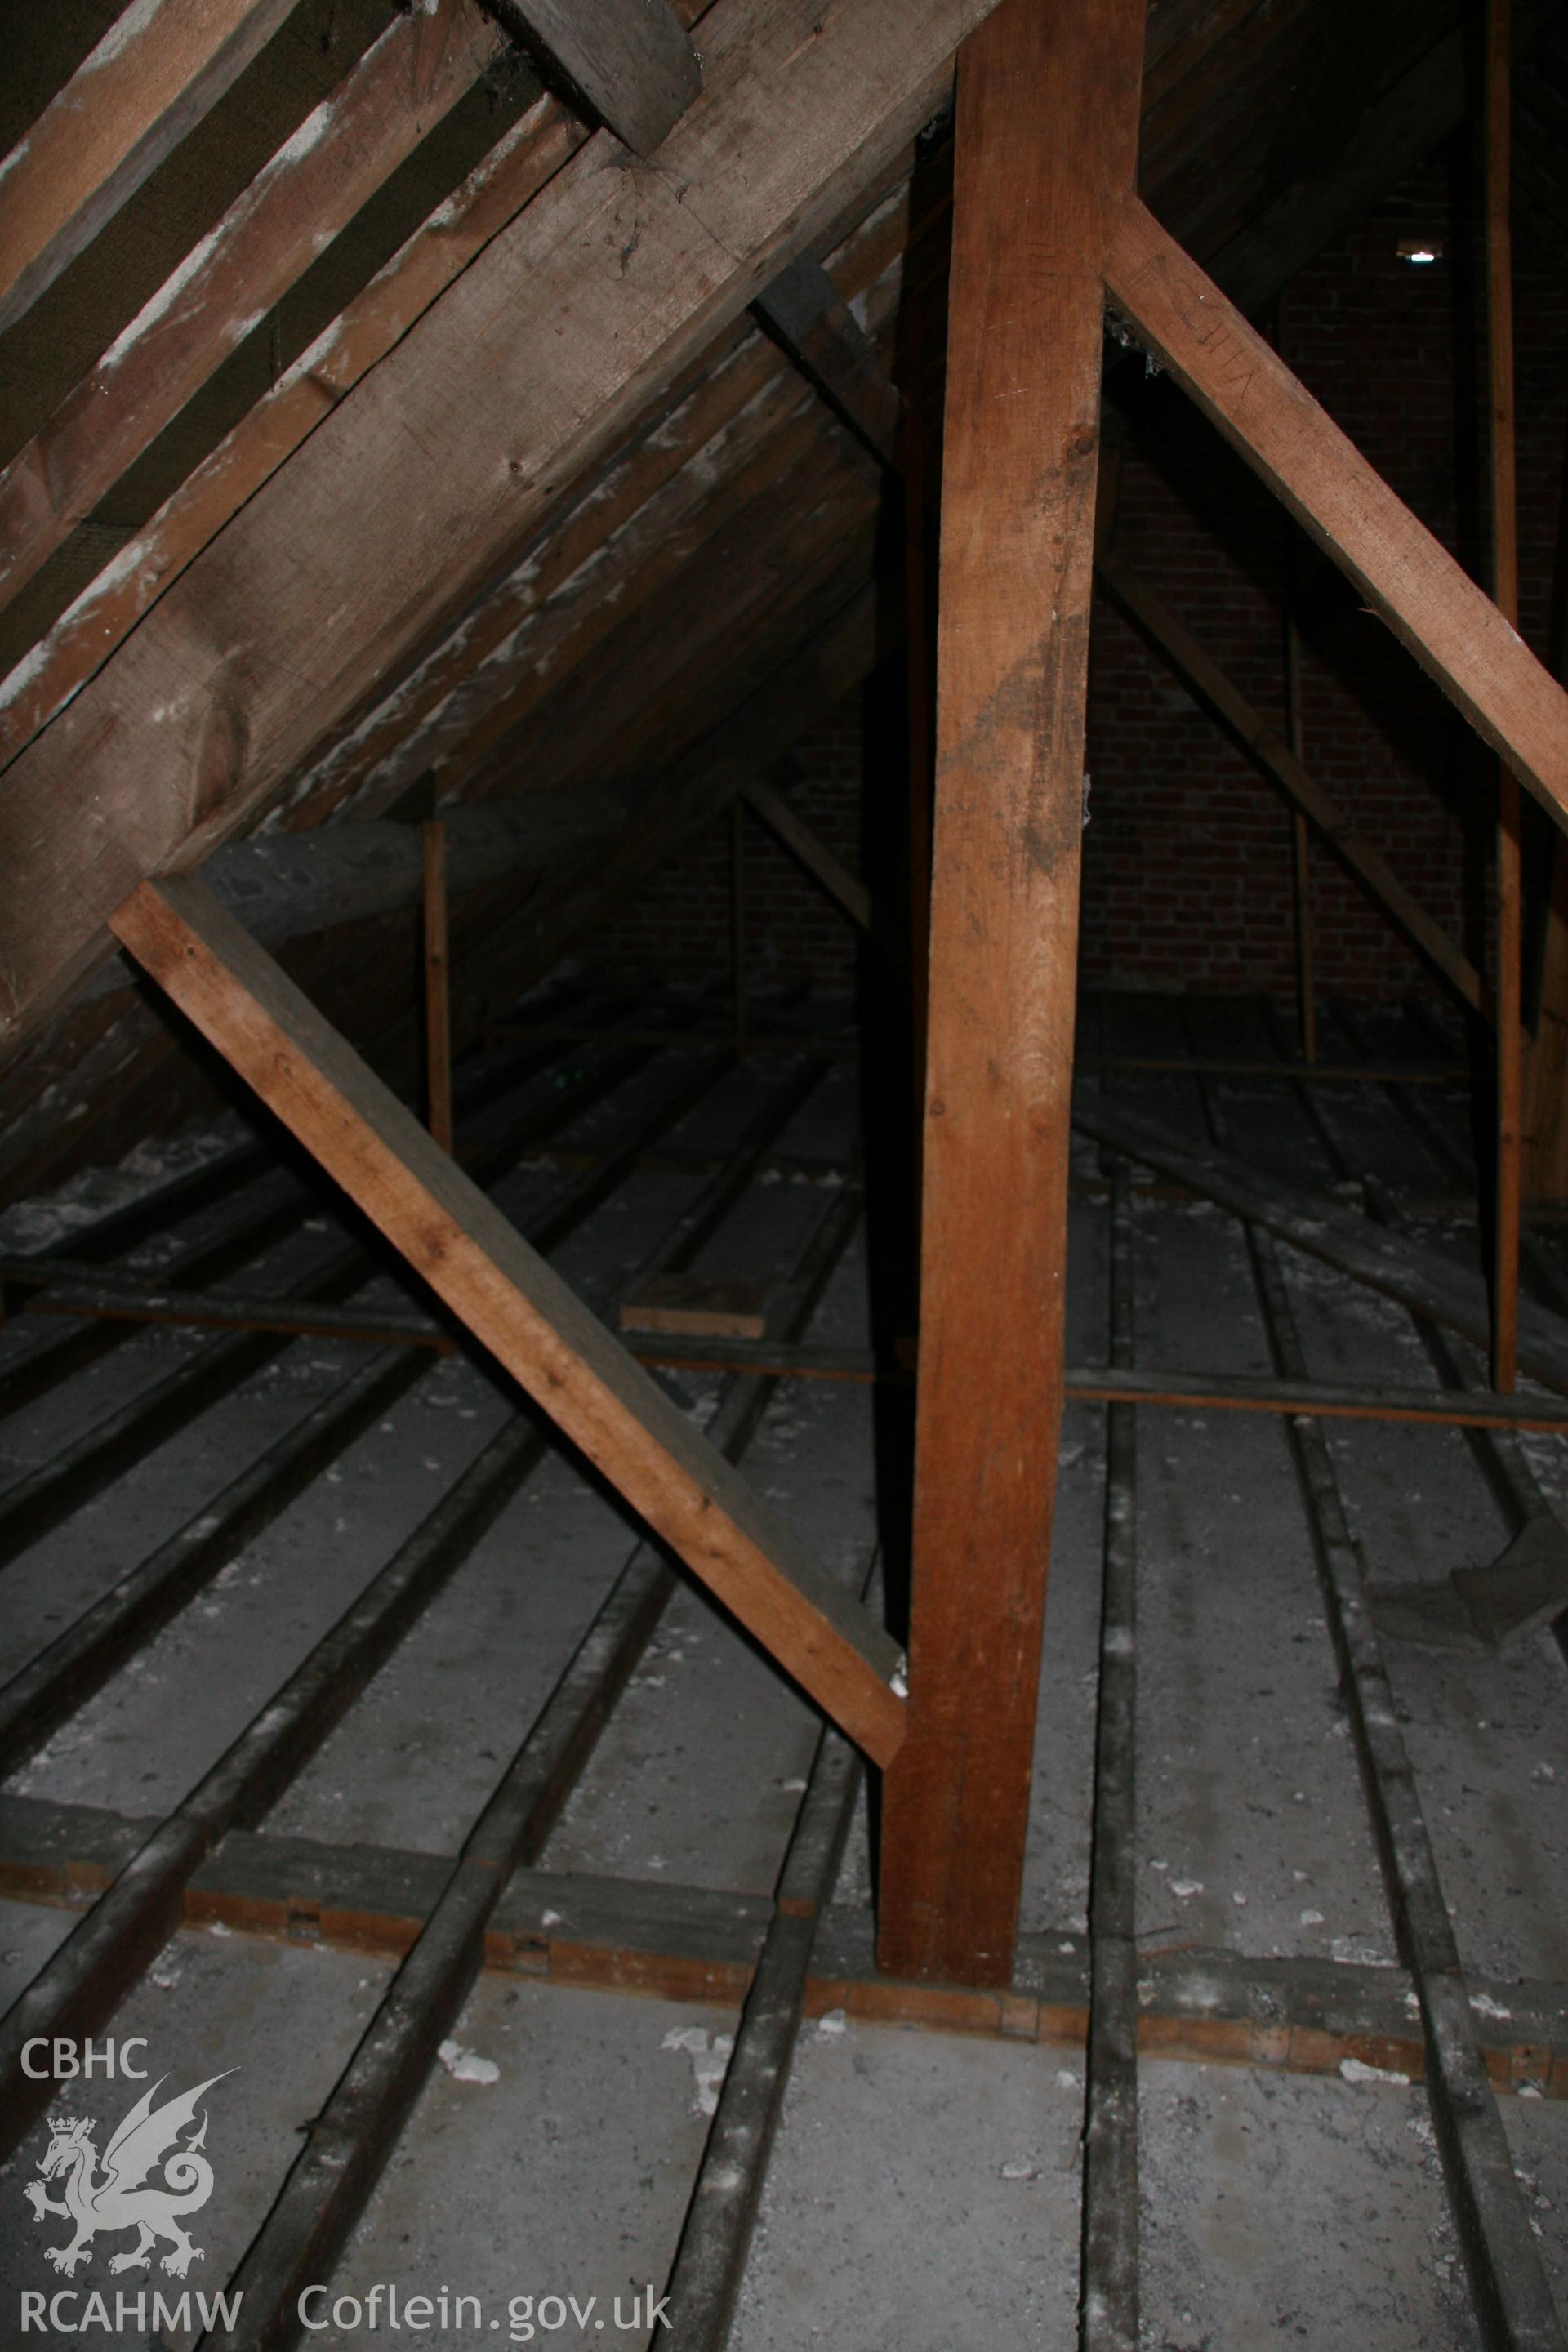 Photograph showing detailed interior view of wooden beams & floorboards in loft of former Llawrybettws Welsh Calvinistic Methodist chapel, Glanyrafon, Corwen. Taken by Tim Allen on 27th February 2019 to meet a condition attached to planning application.